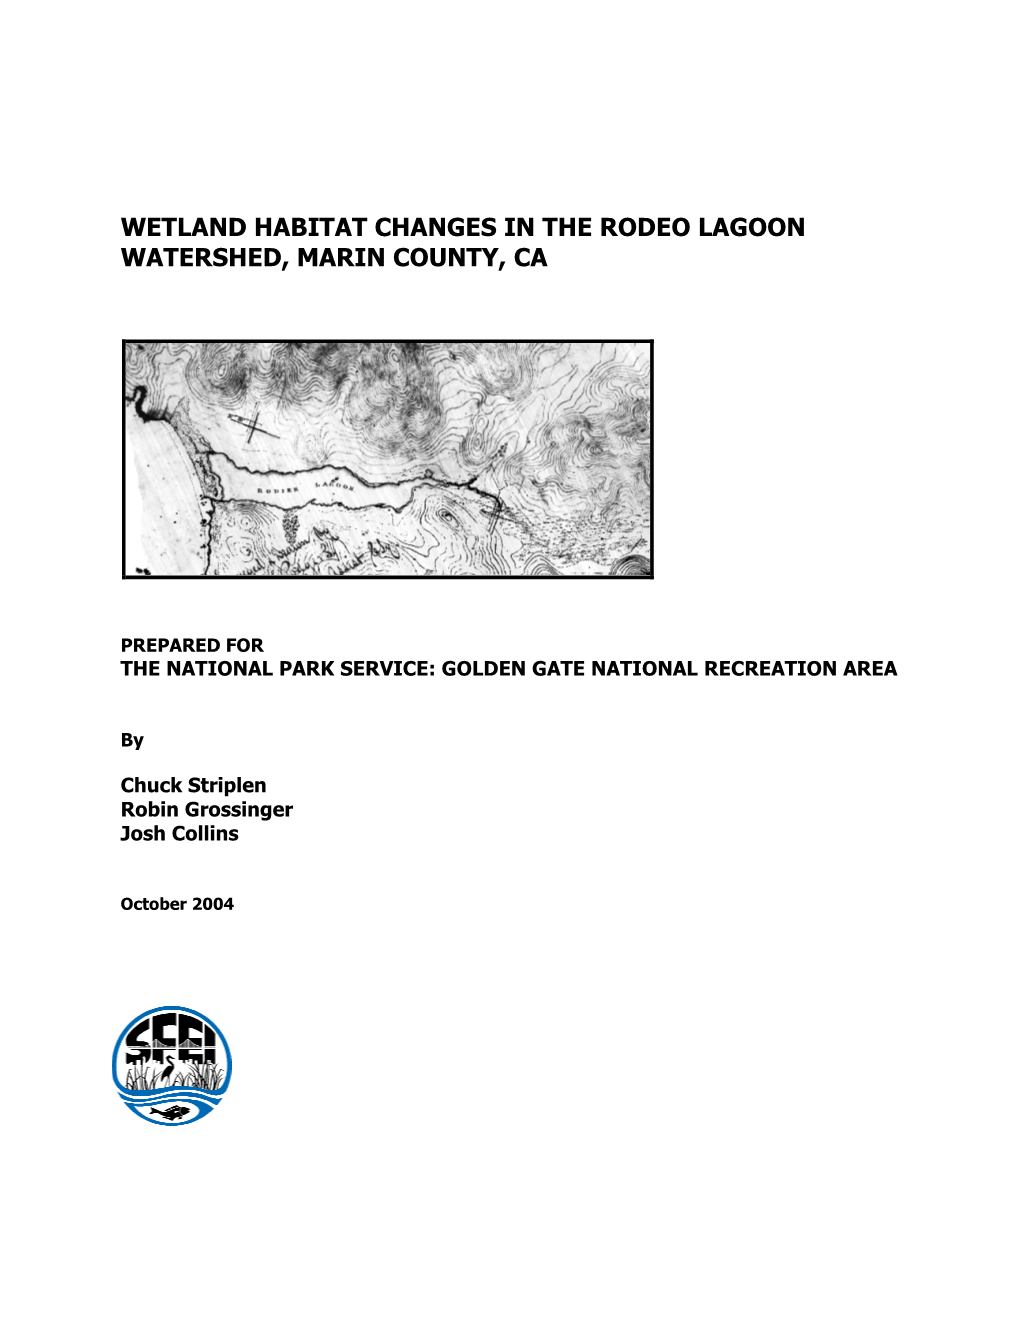 Wetland Habitat Changes in the Rodeo Lagoon Watershed, Marin County, Ca